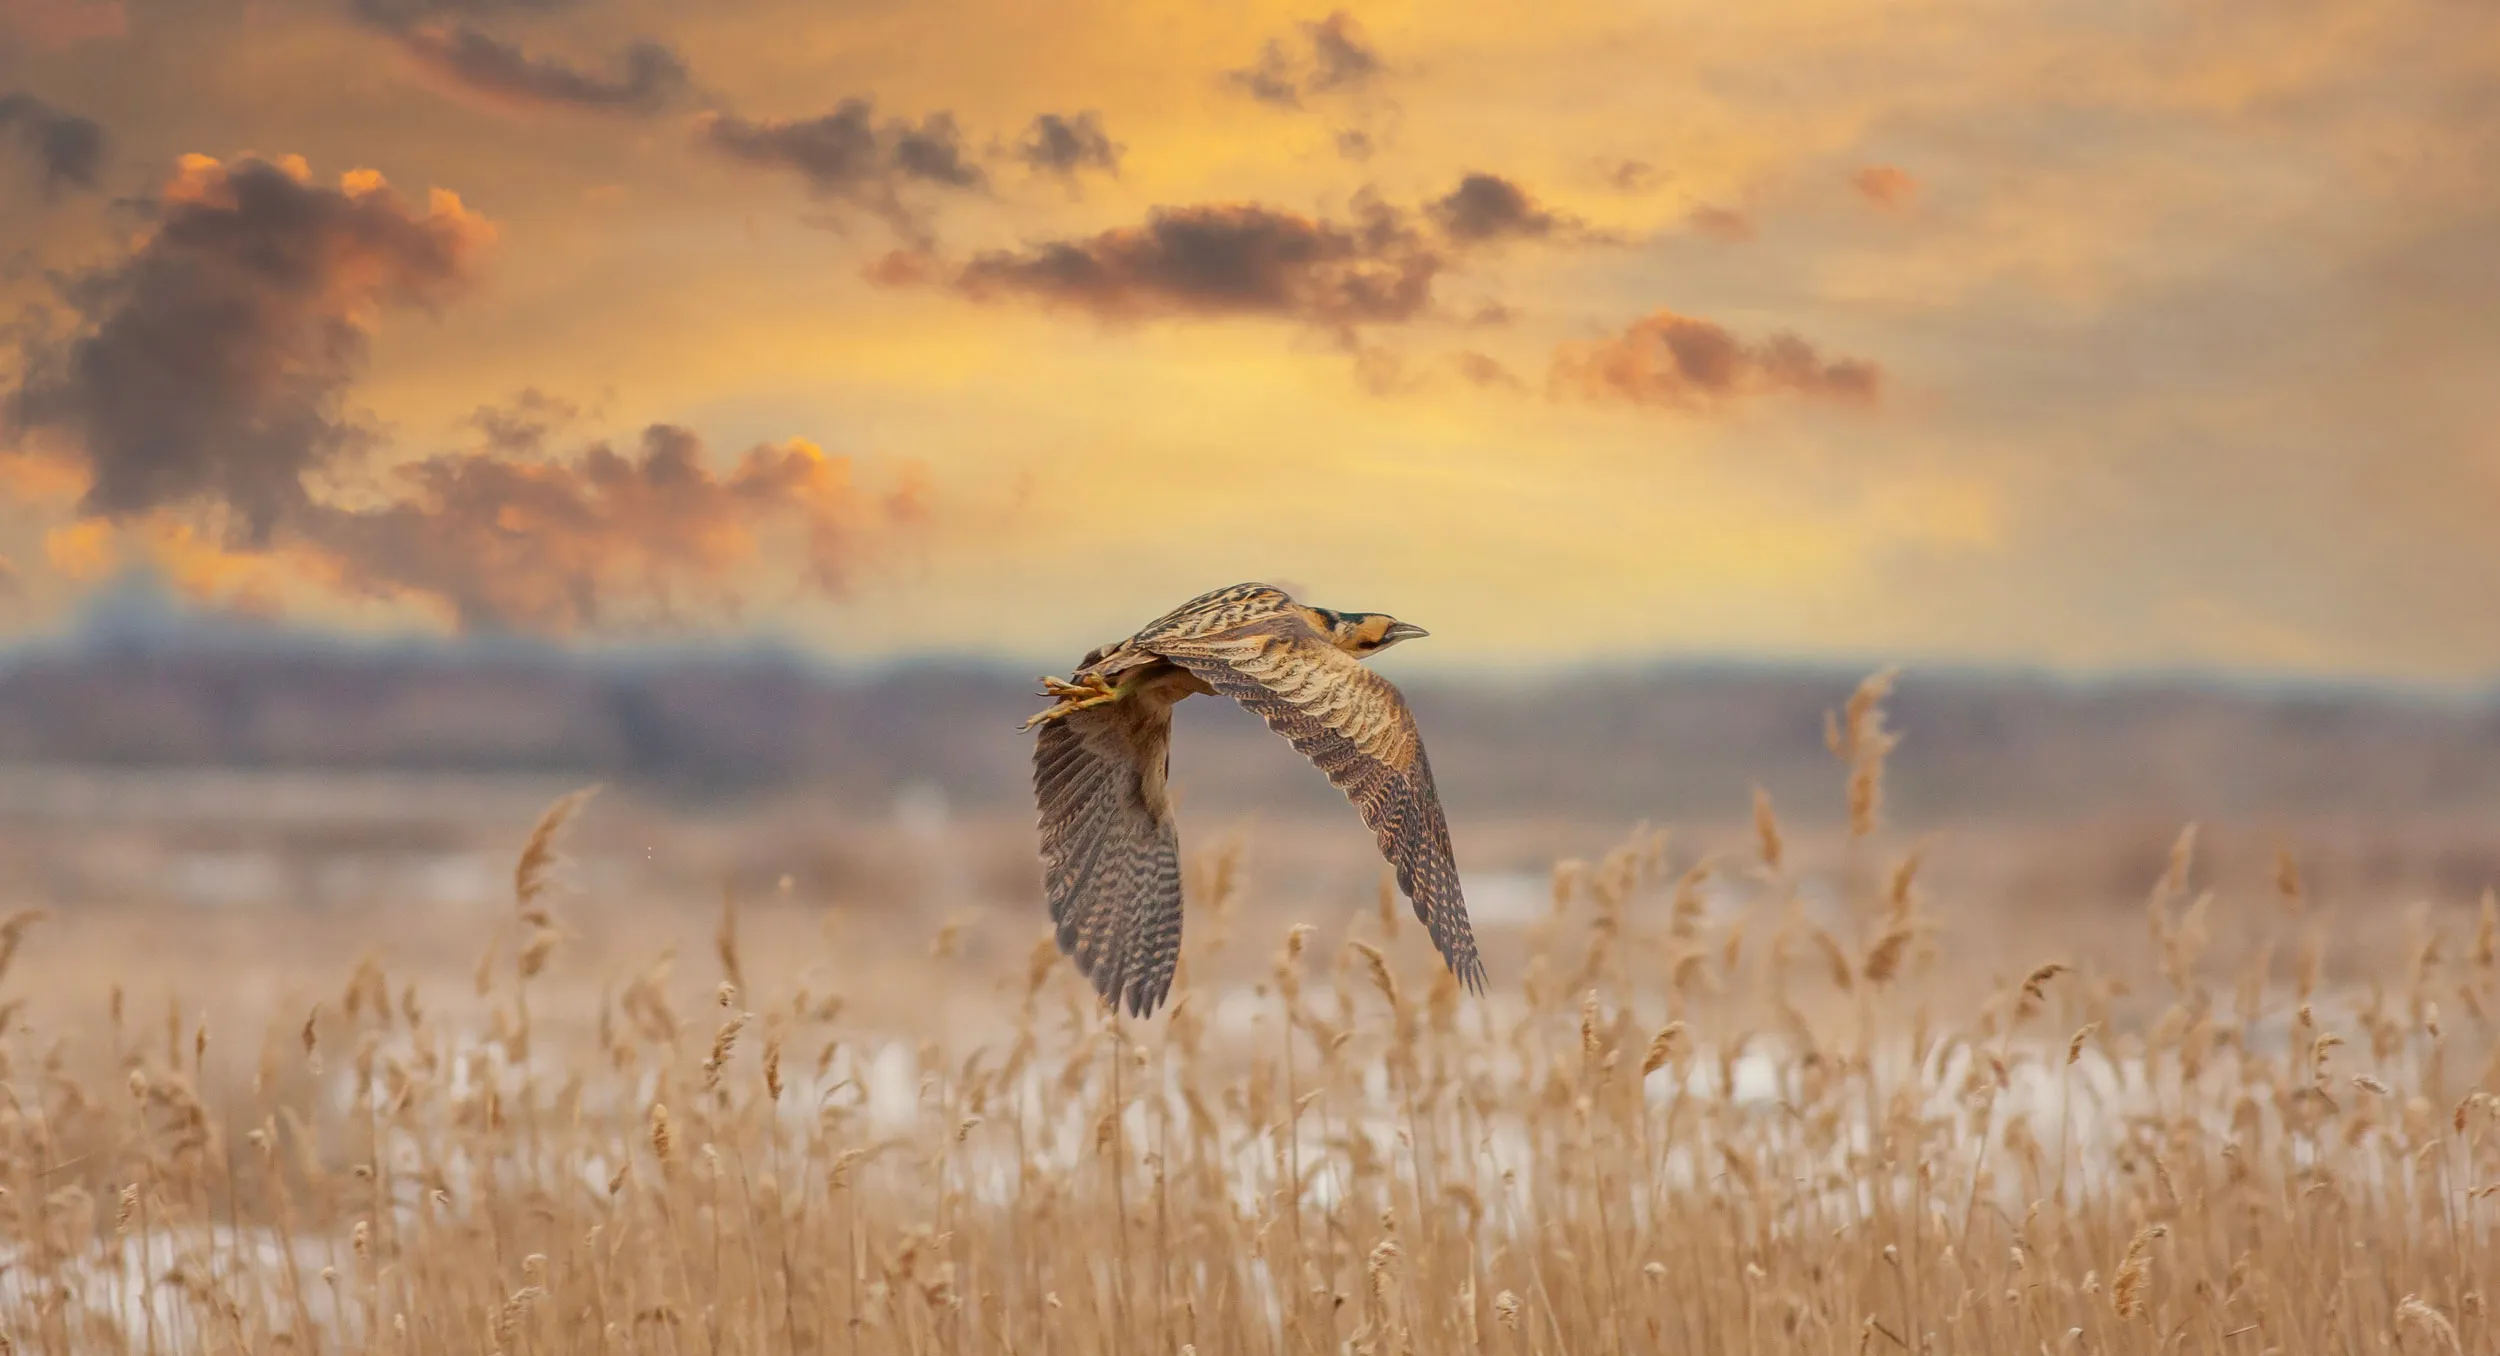 A Bittern in mid flight over a reedbed against a pink and orange sunset sky.